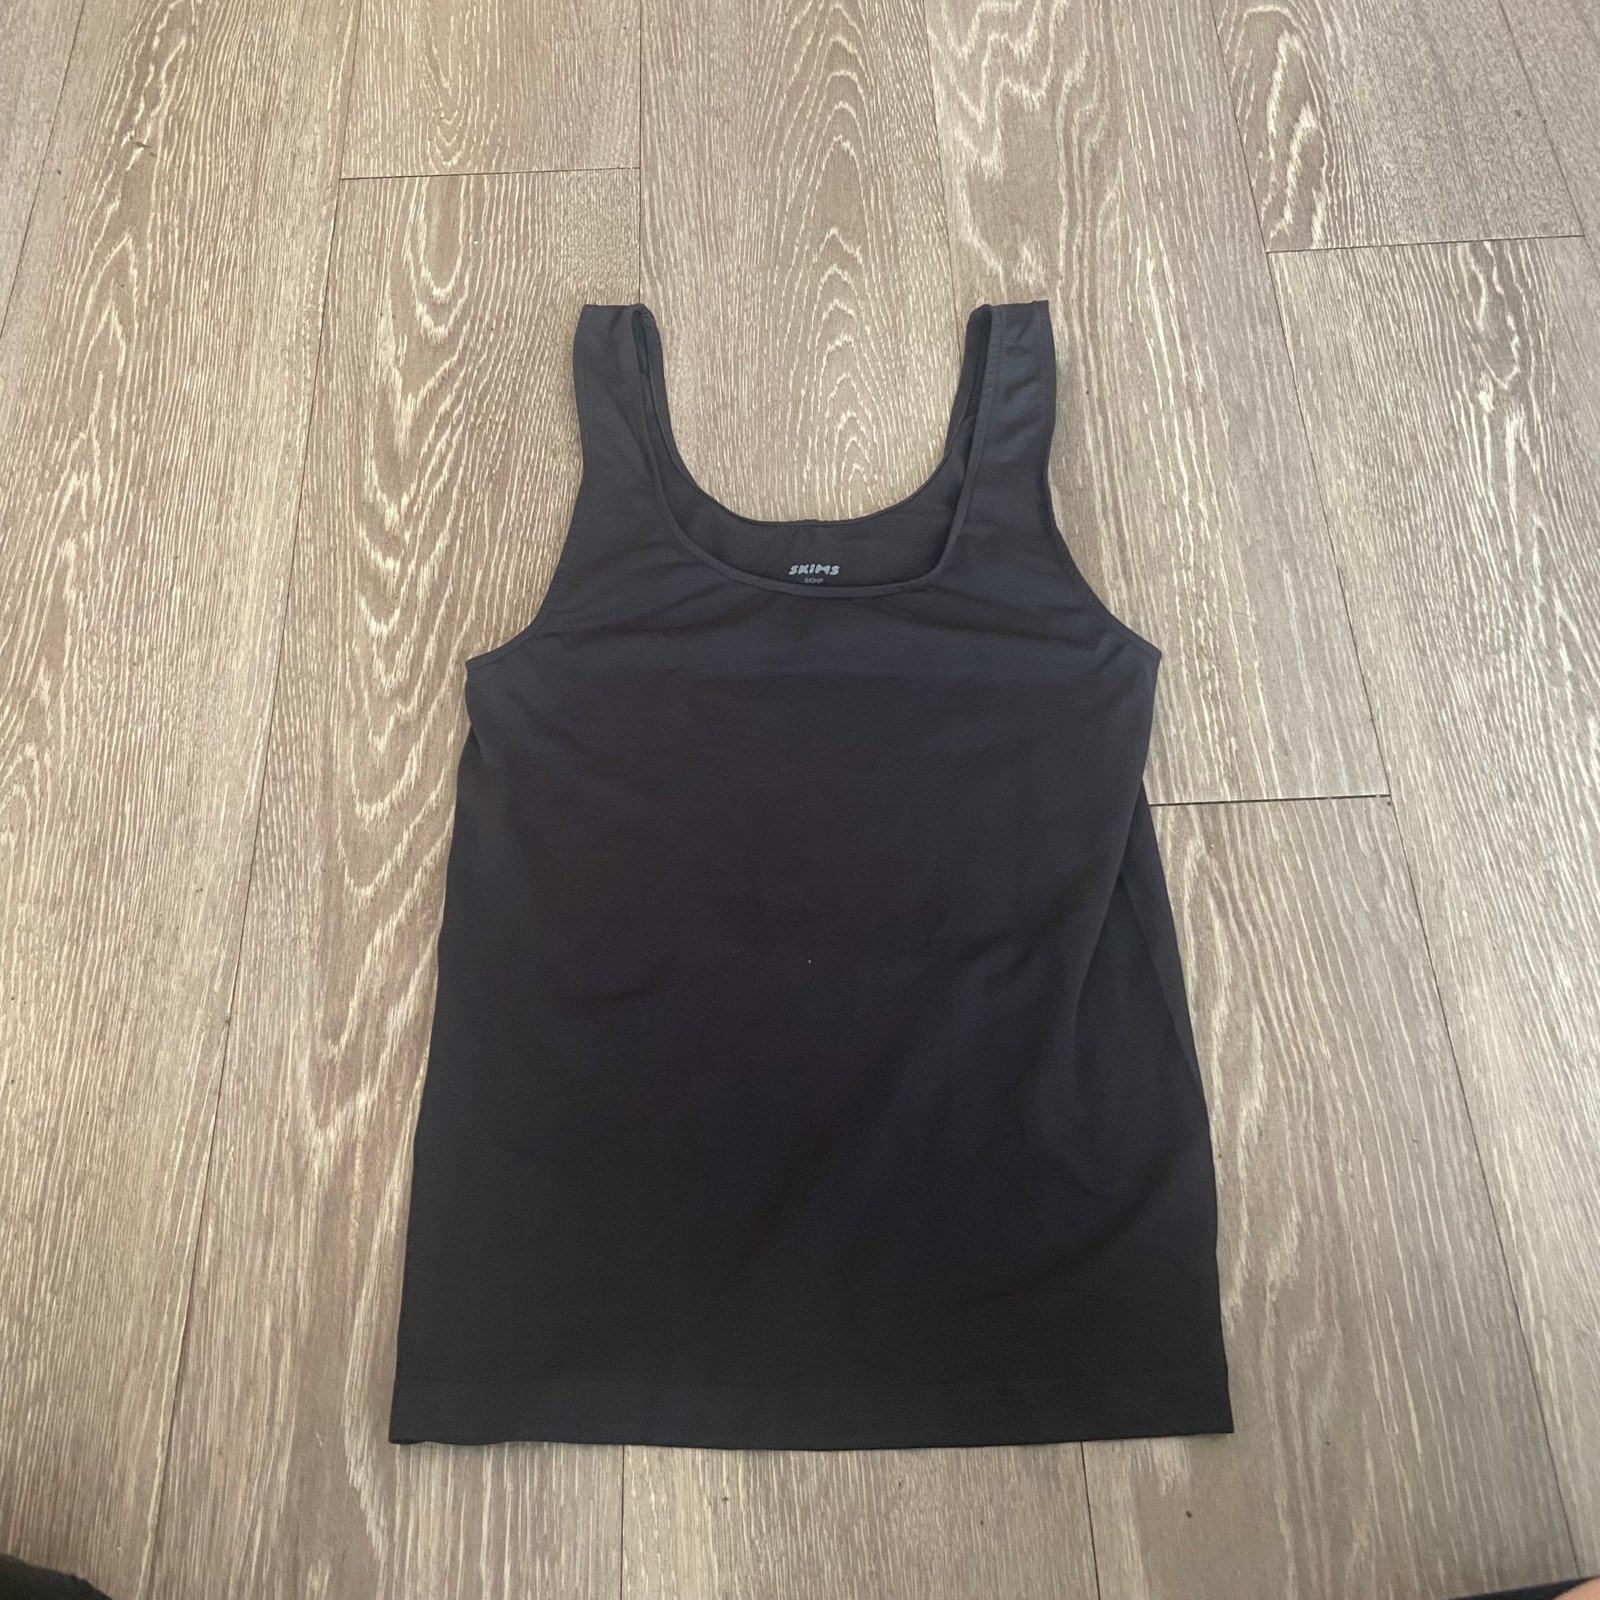 Special offer  Tank Top Skims tank top black size small nSmxnus6w outlet online shop